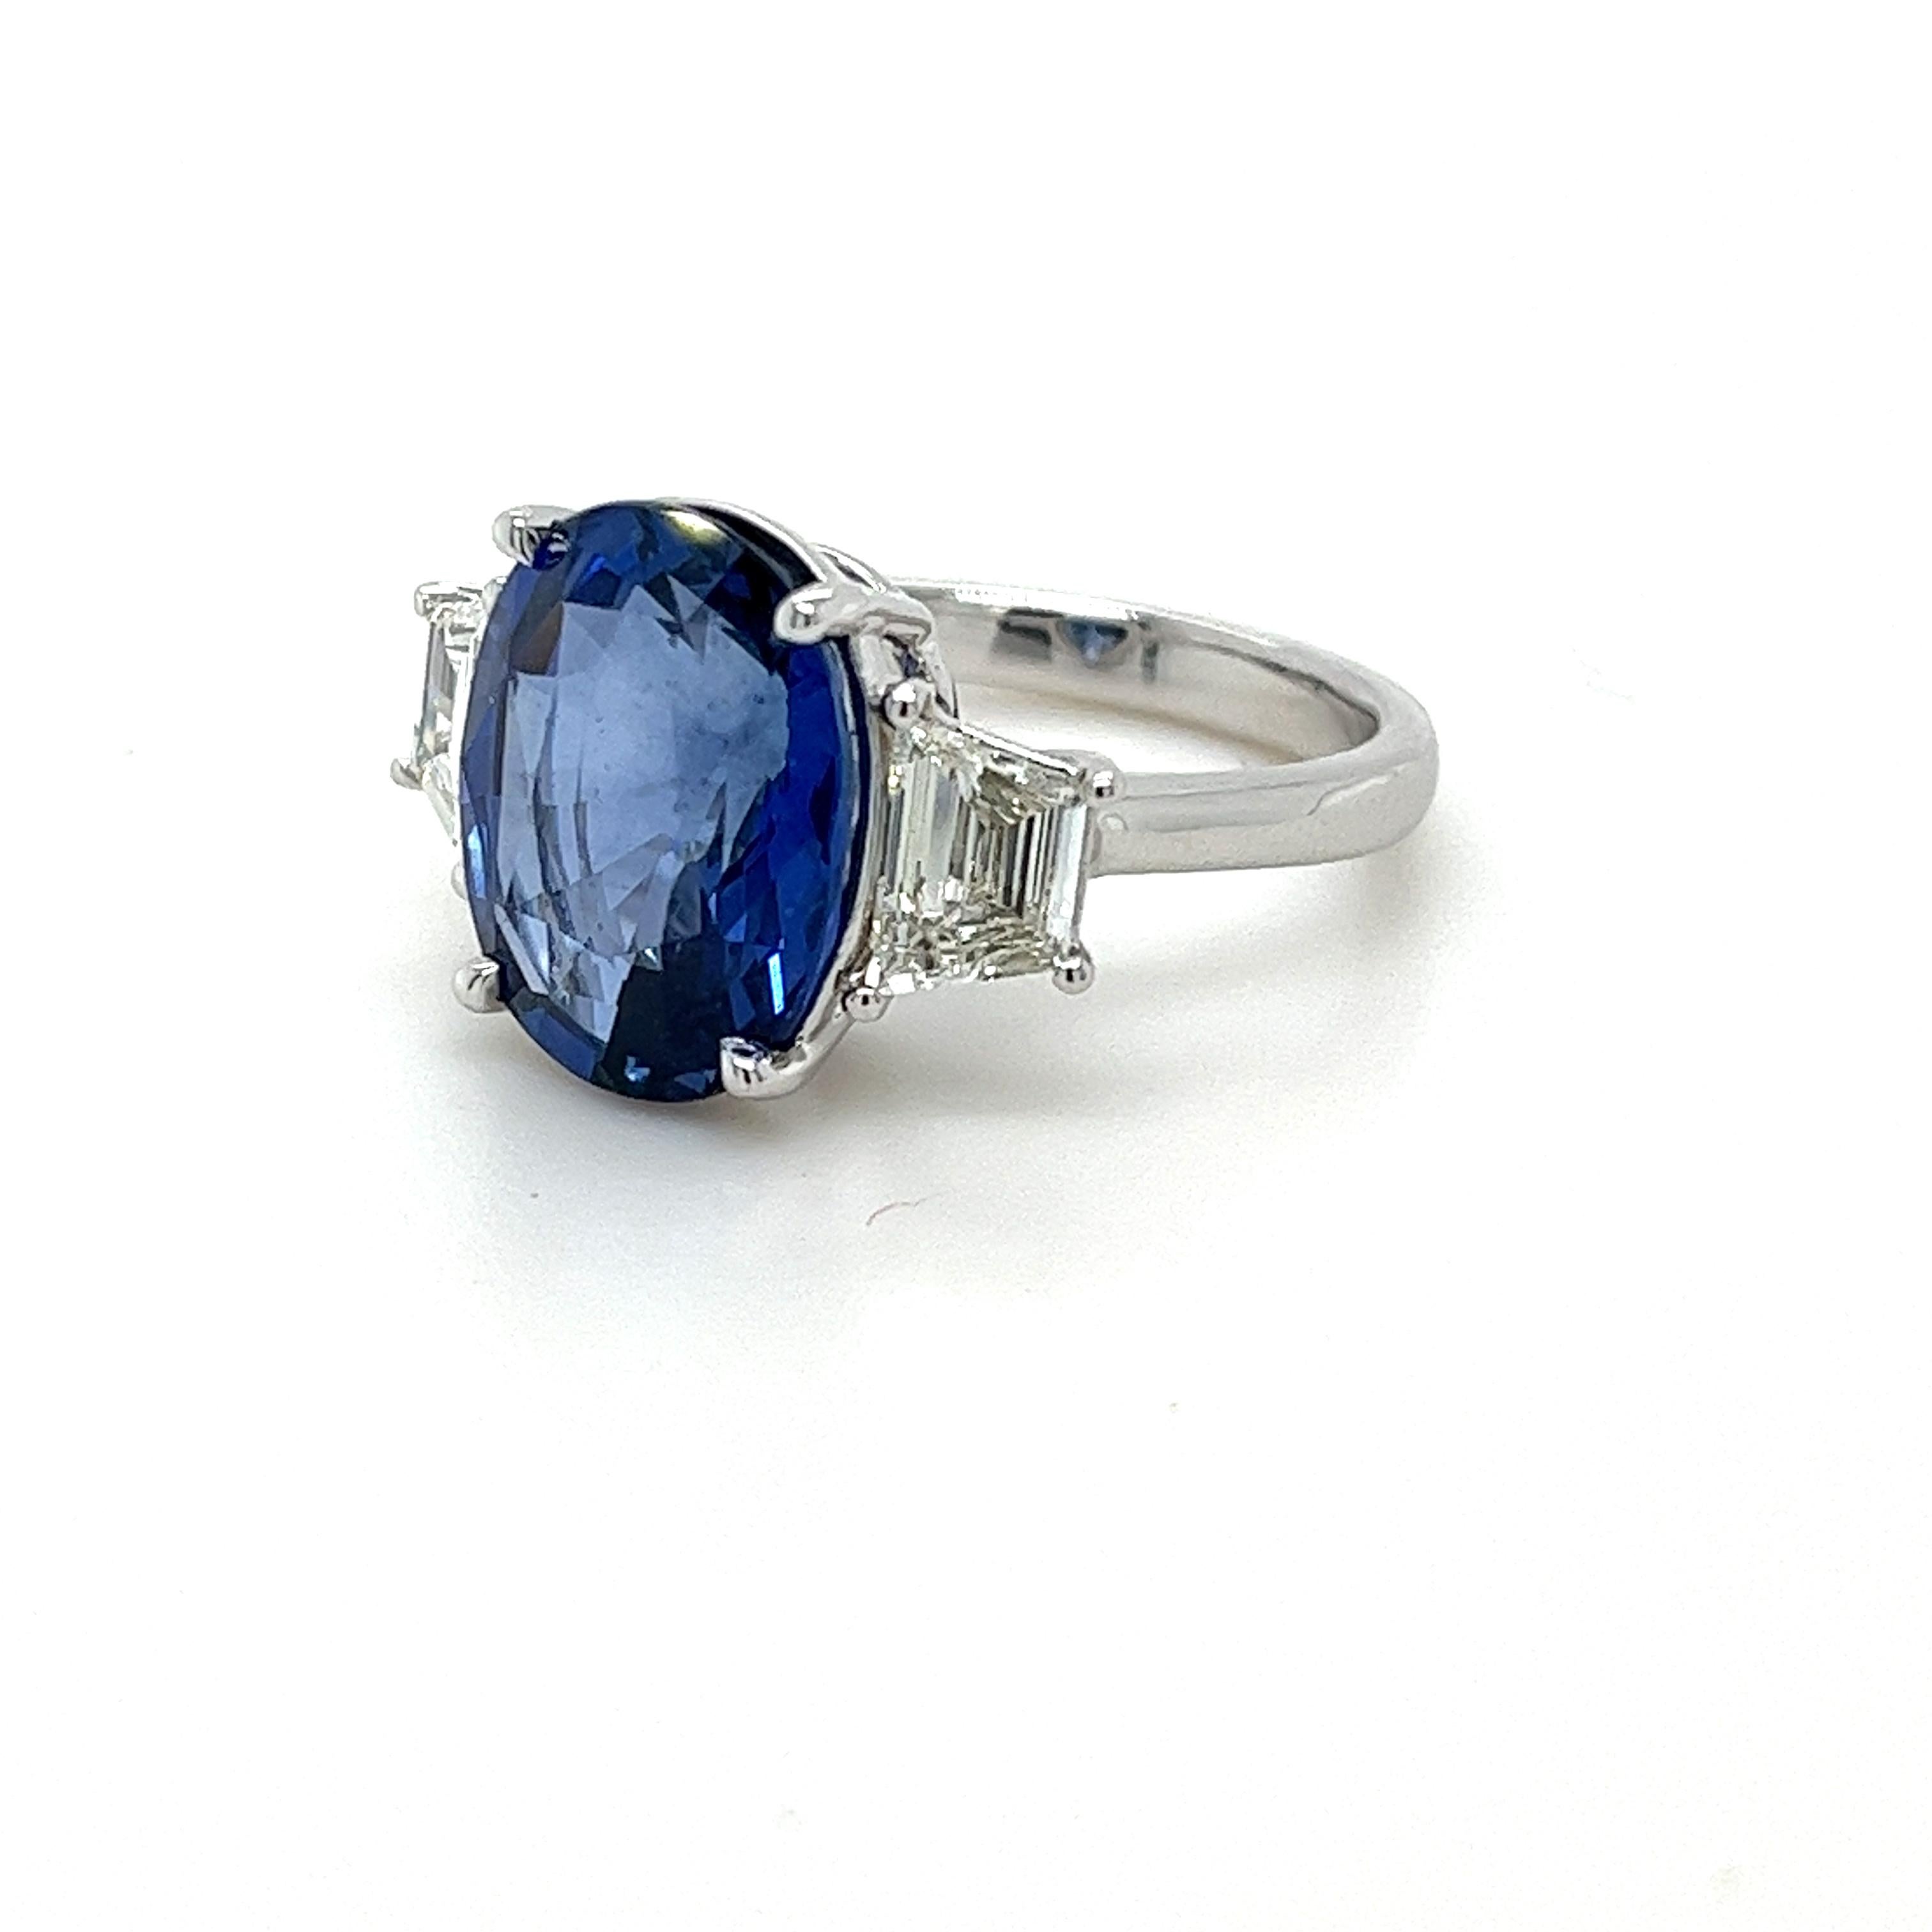 Oval Ceylon Sapphire weighing 7.93 carats
Measuring (13.7x10.4) mm
Trapezoid Diamonds weigh 1.15 carats
Diamond quality VS-H
Set in platinum ring
8.14 grams